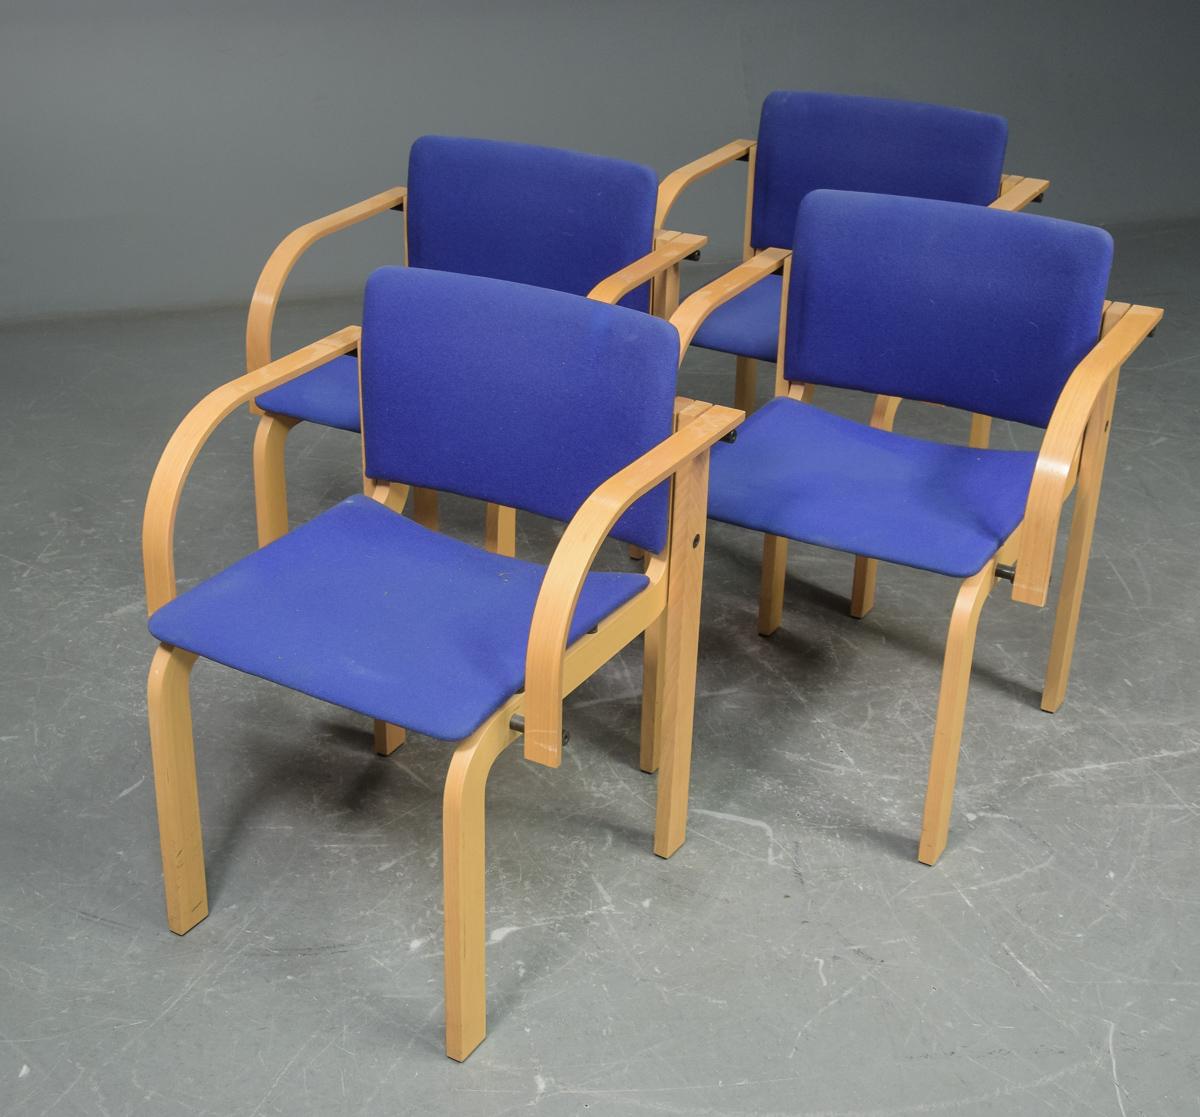 Set of four Friis and Molkte stackable beech dining chairs in by Fritz Hansen

The well made chairs designed in 1985 have been checked by our cabinetmaker and both frames and fabric are in very good condition with only few and minor signs of use and